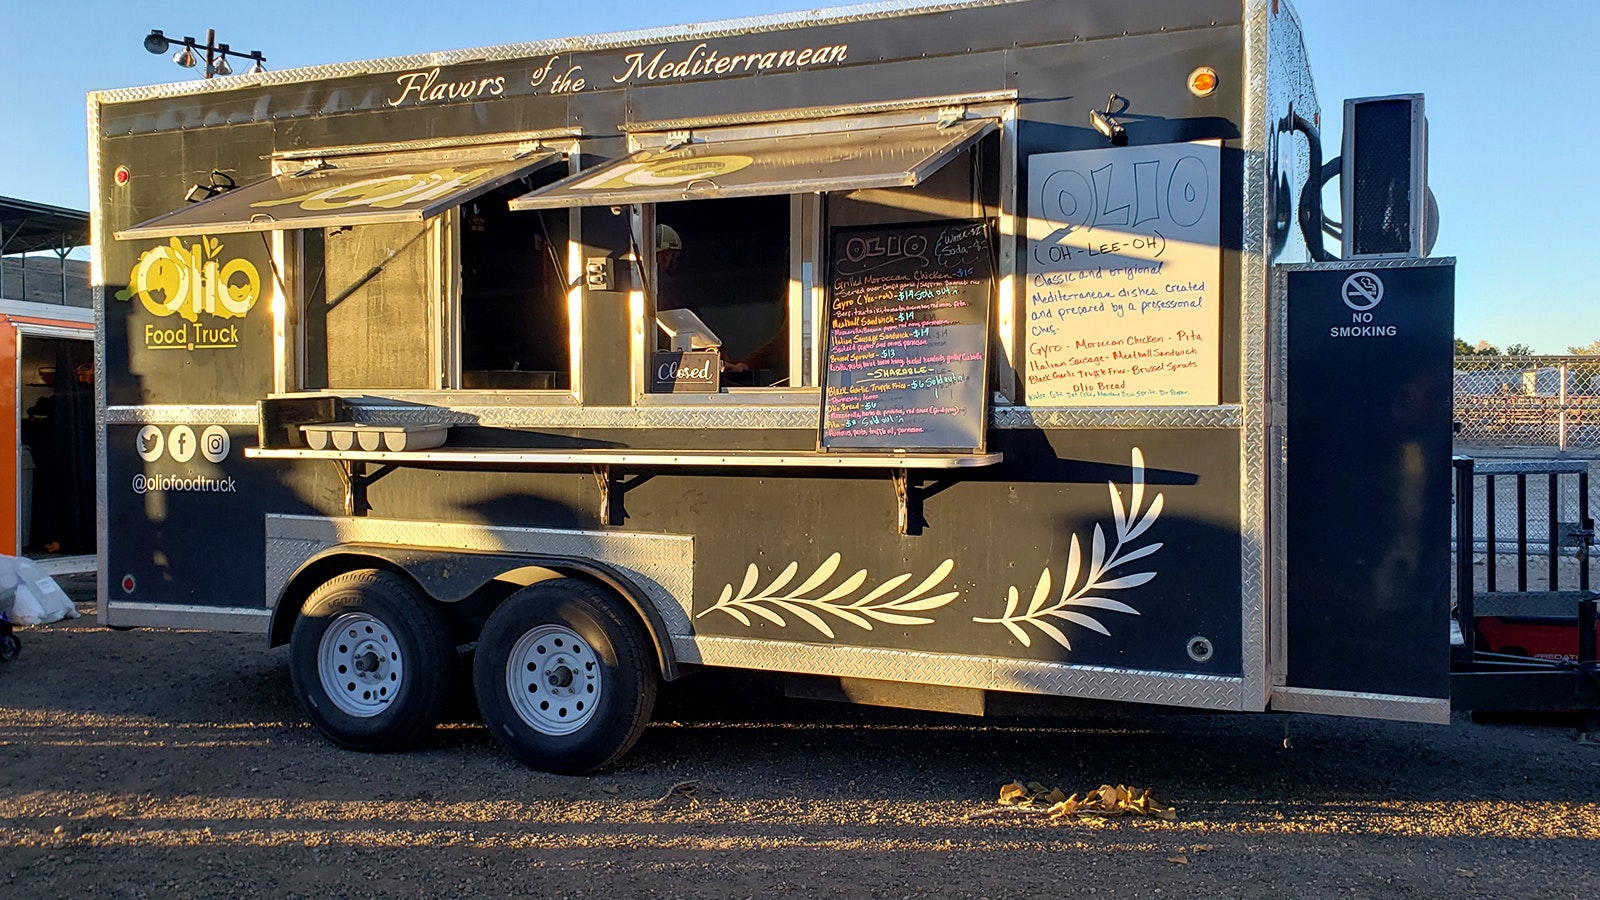 Olio Food truck was the first to sell out at the Taste of Wyoming Food Truck Festival and Vendor Showcase.